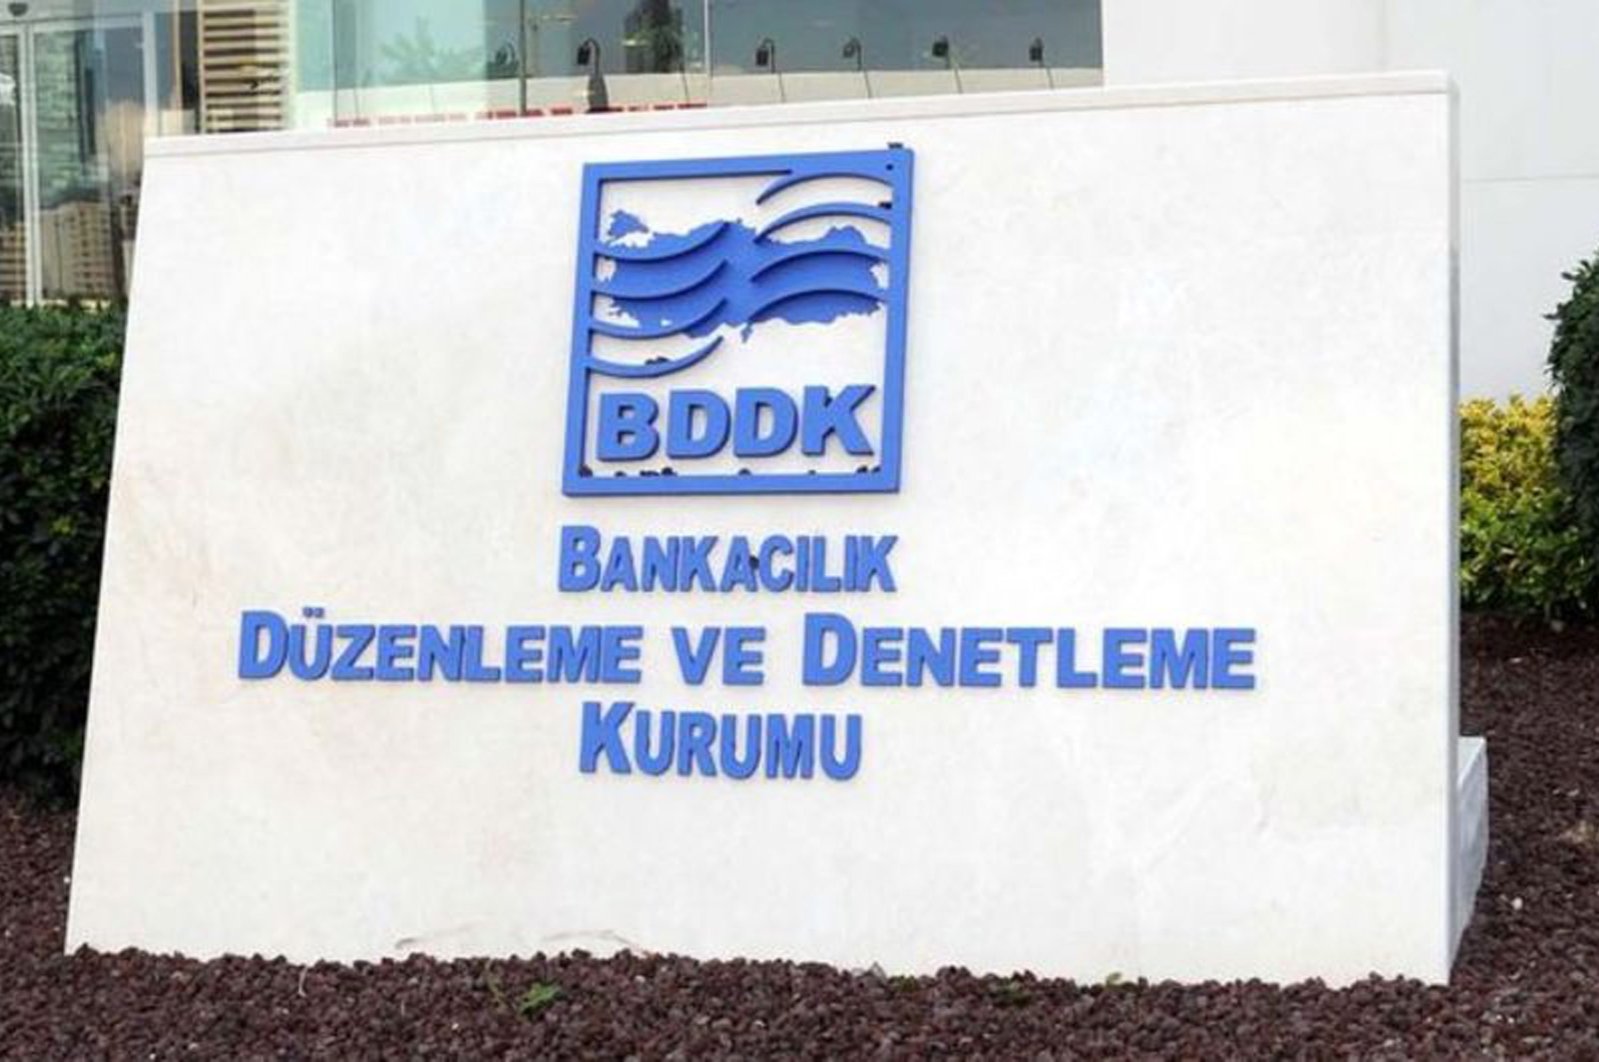 The Banking Regulation and Supervision Agency's (BDDK) logo is seen in front of its headquarters in Istanbul, Turkey.